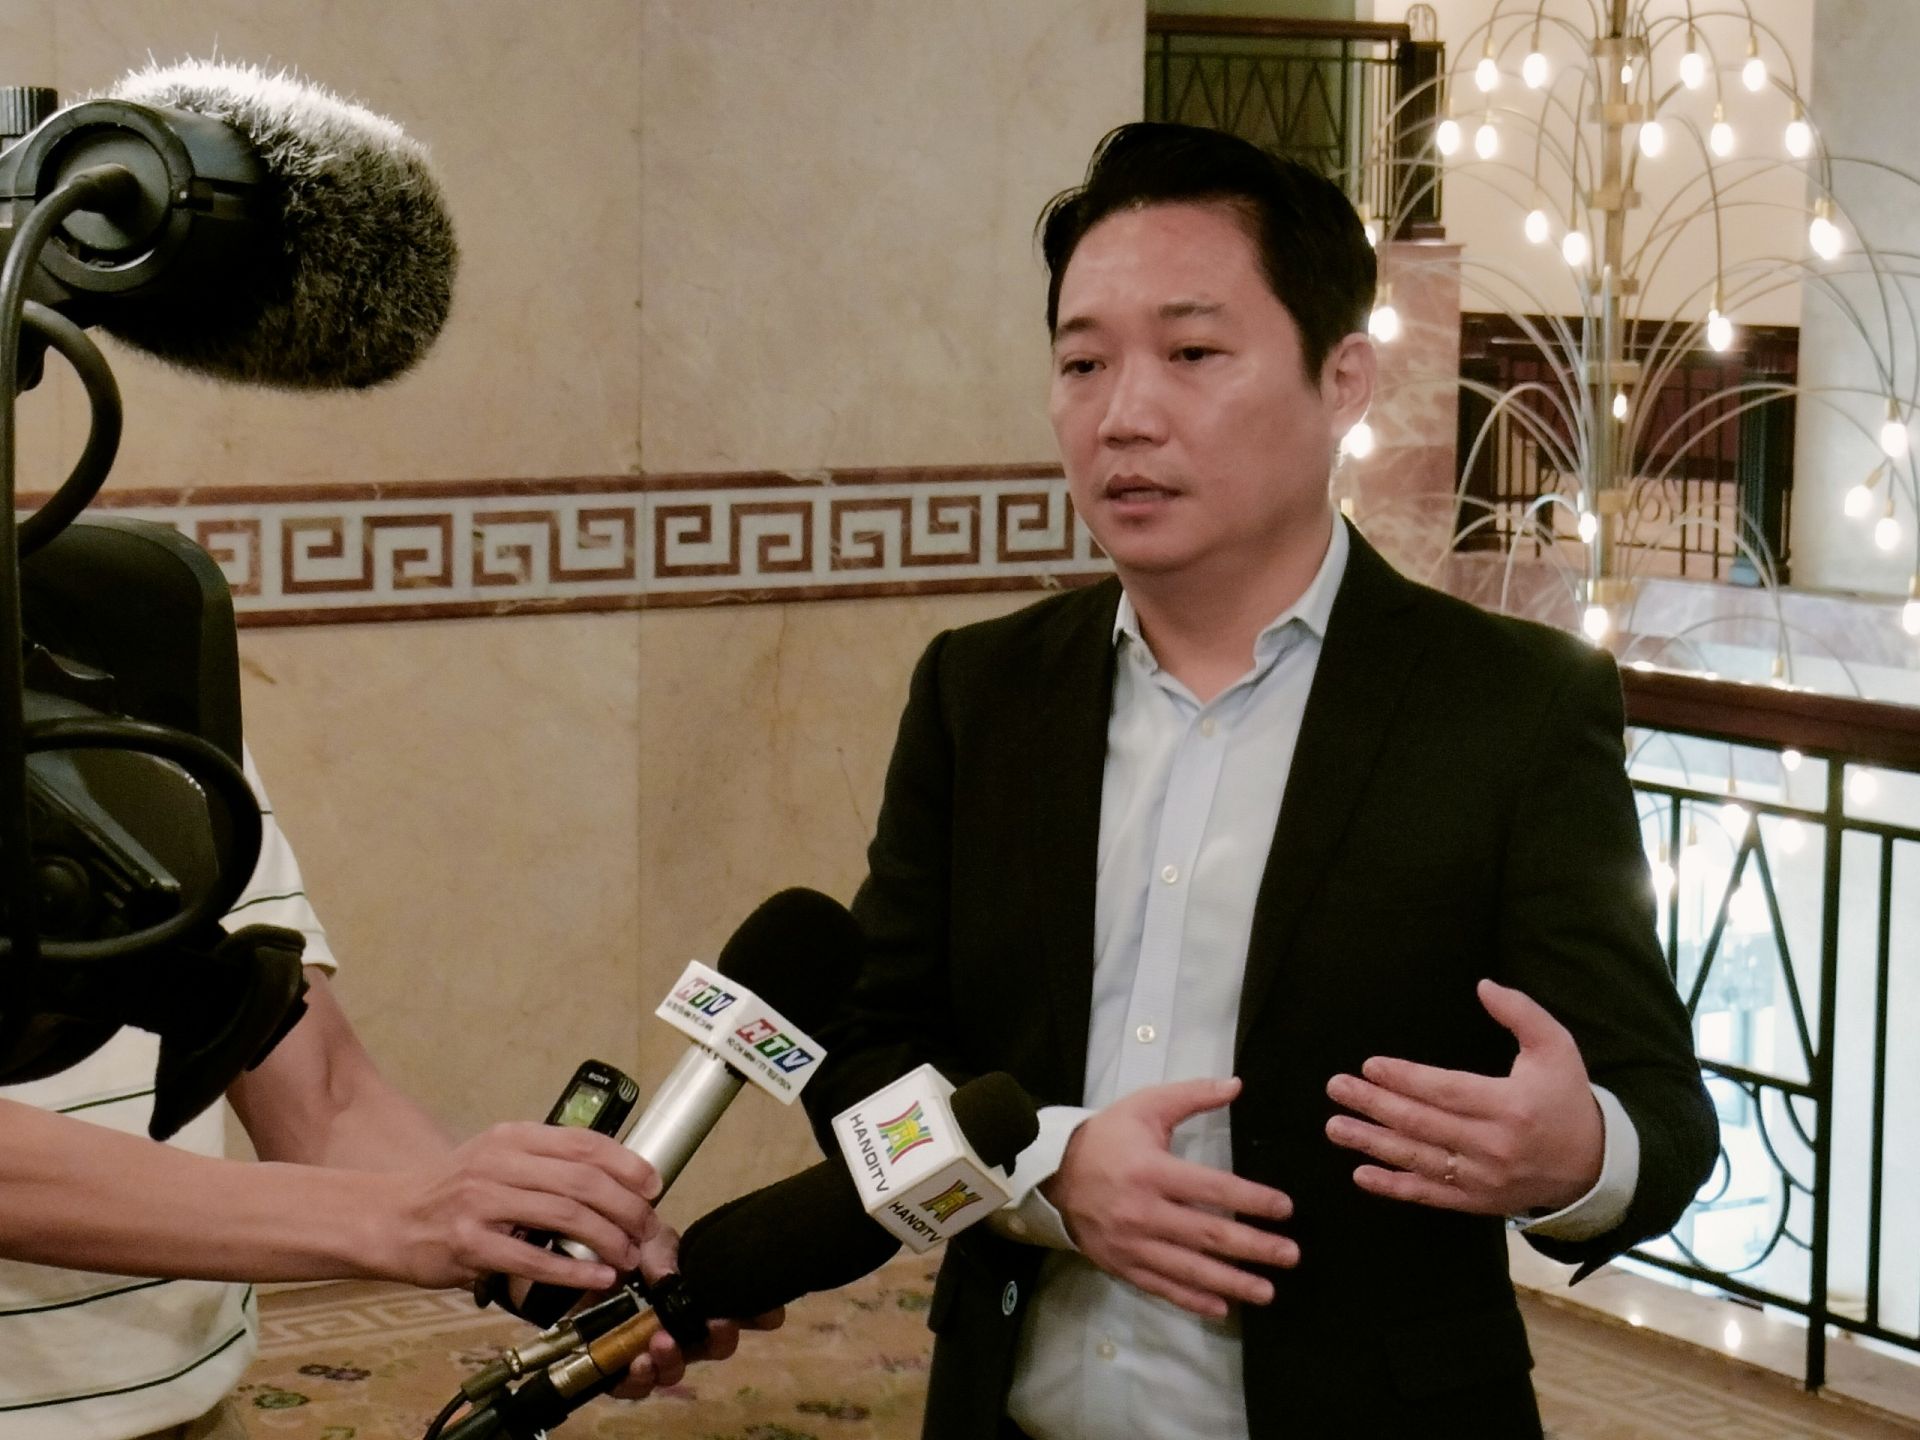 Mr Le Truong Hien Hoa, Deputy Director of the Ho Chi Minh City Department of Tourism, answers the press